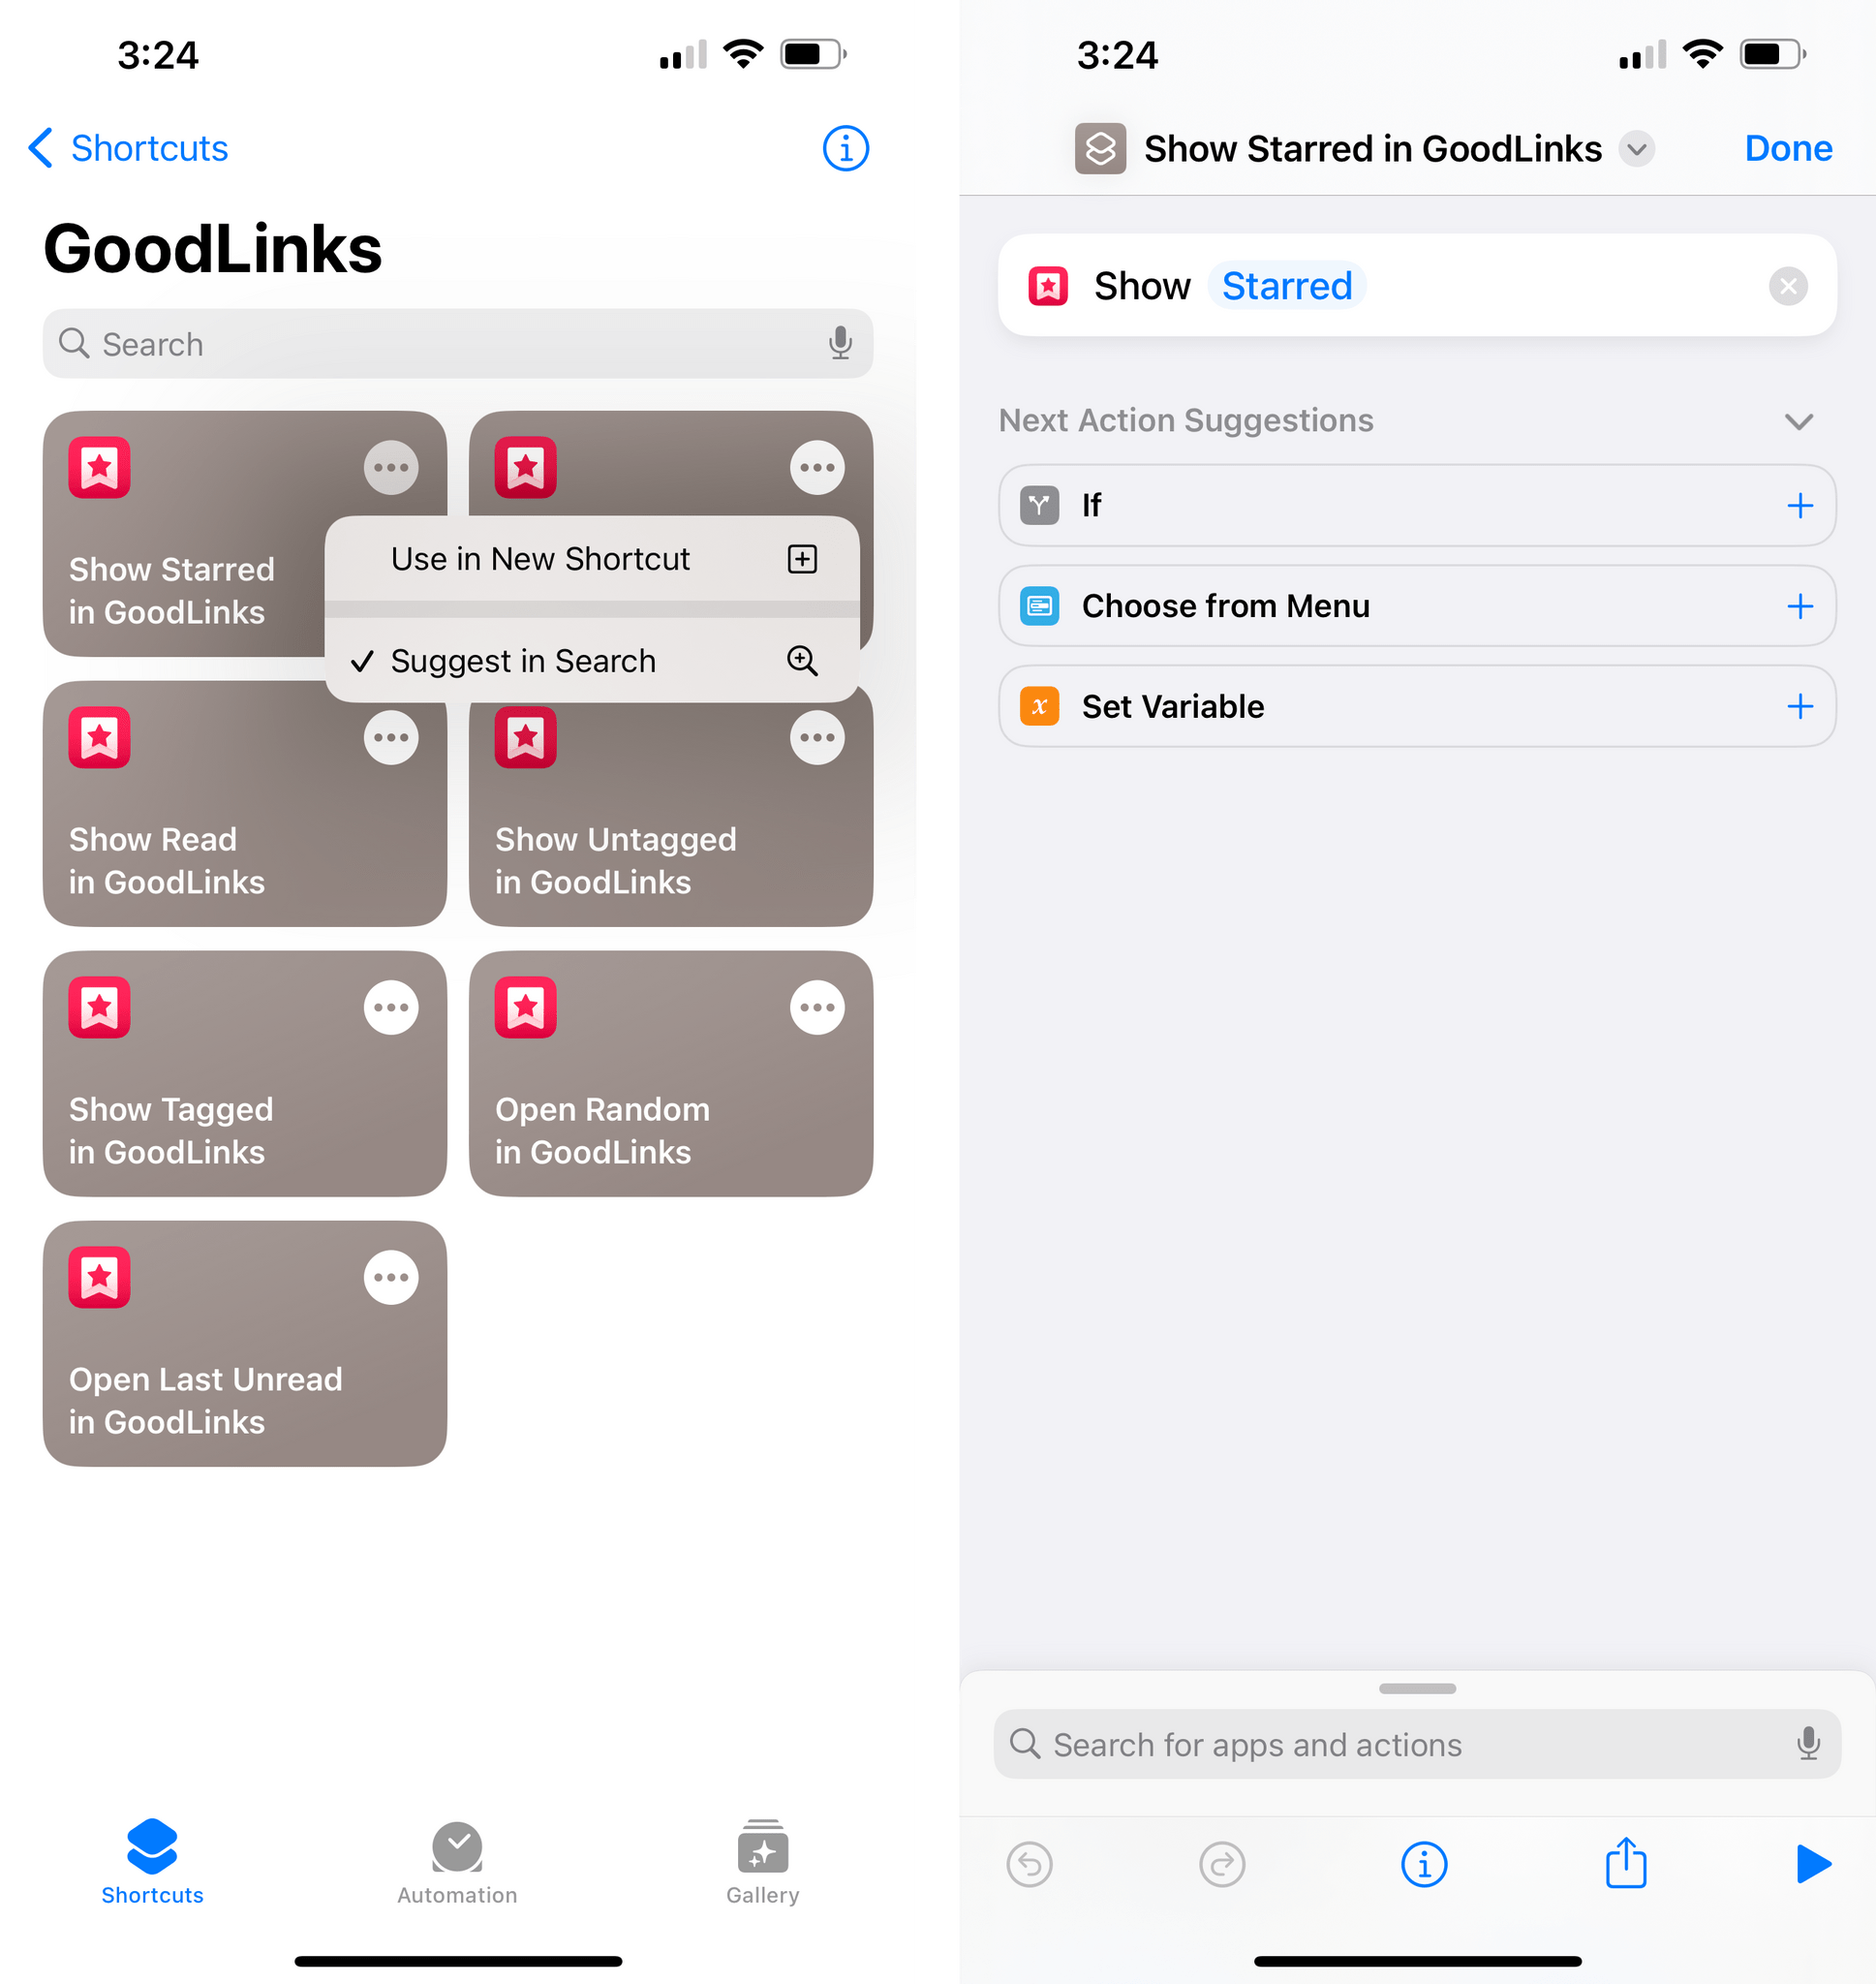 Using an App Shortcut as the starting point for a custom shortcut.